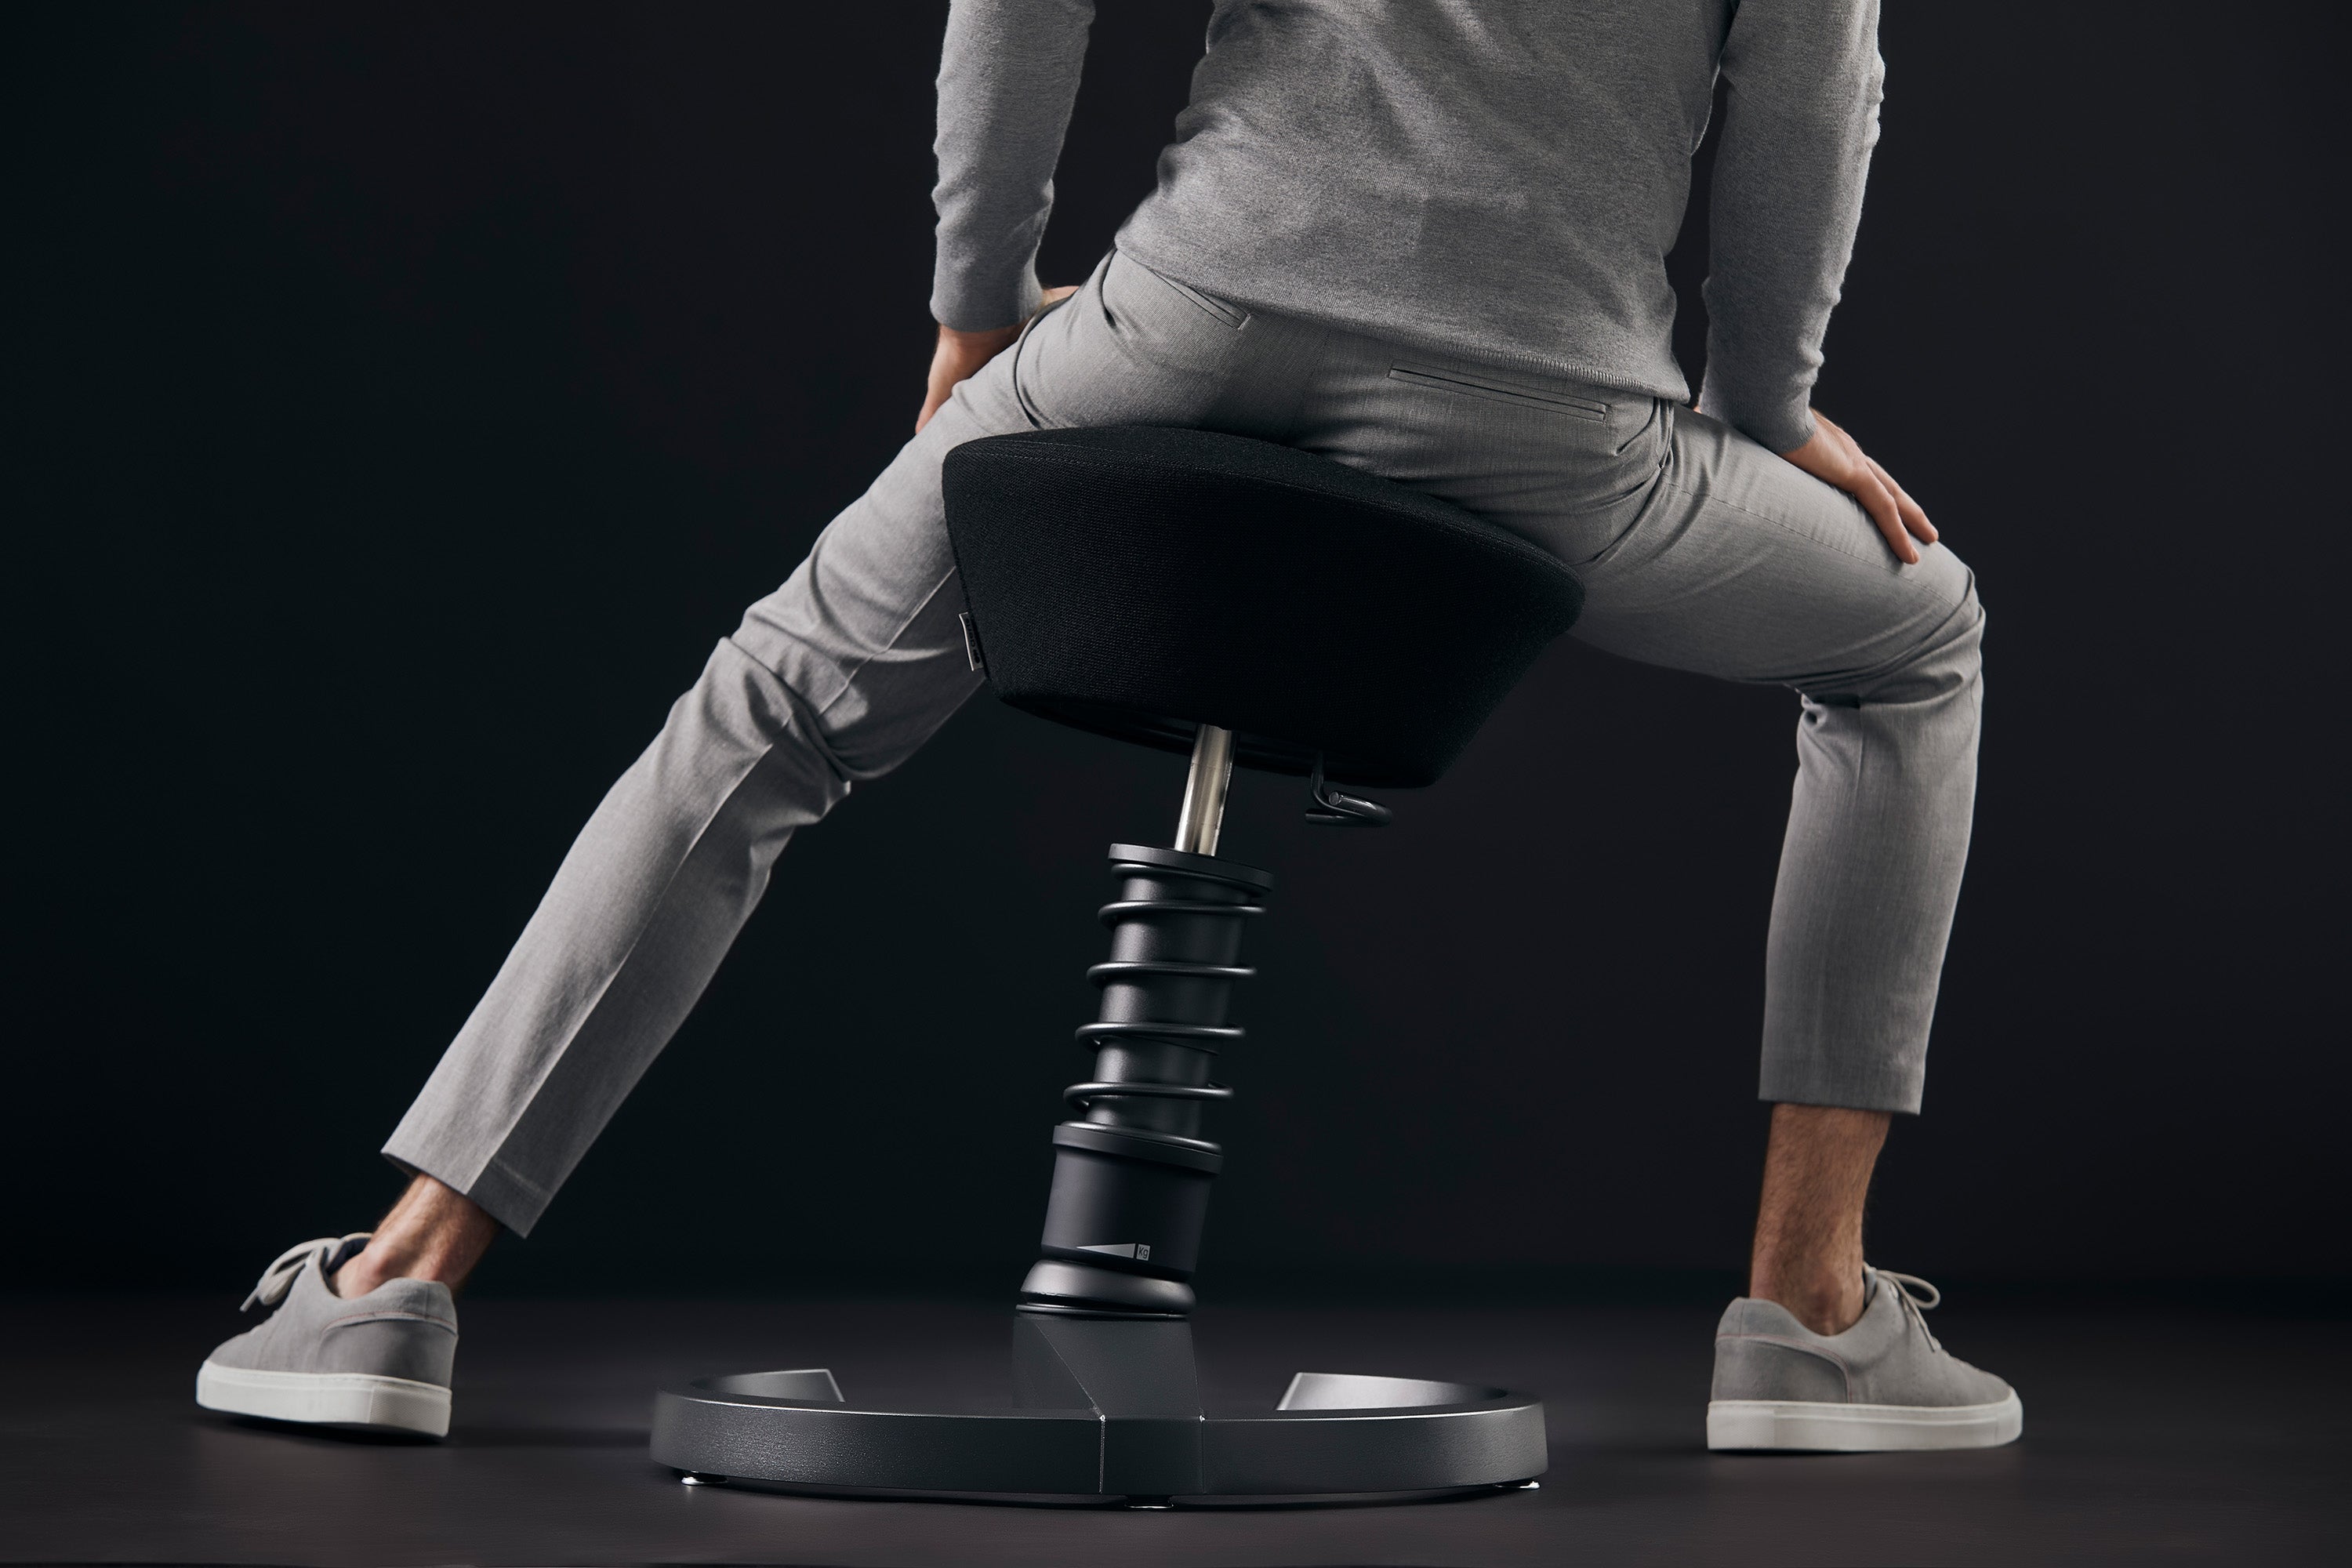 The Aeris Swopper office stool enables active dynamic sitting.